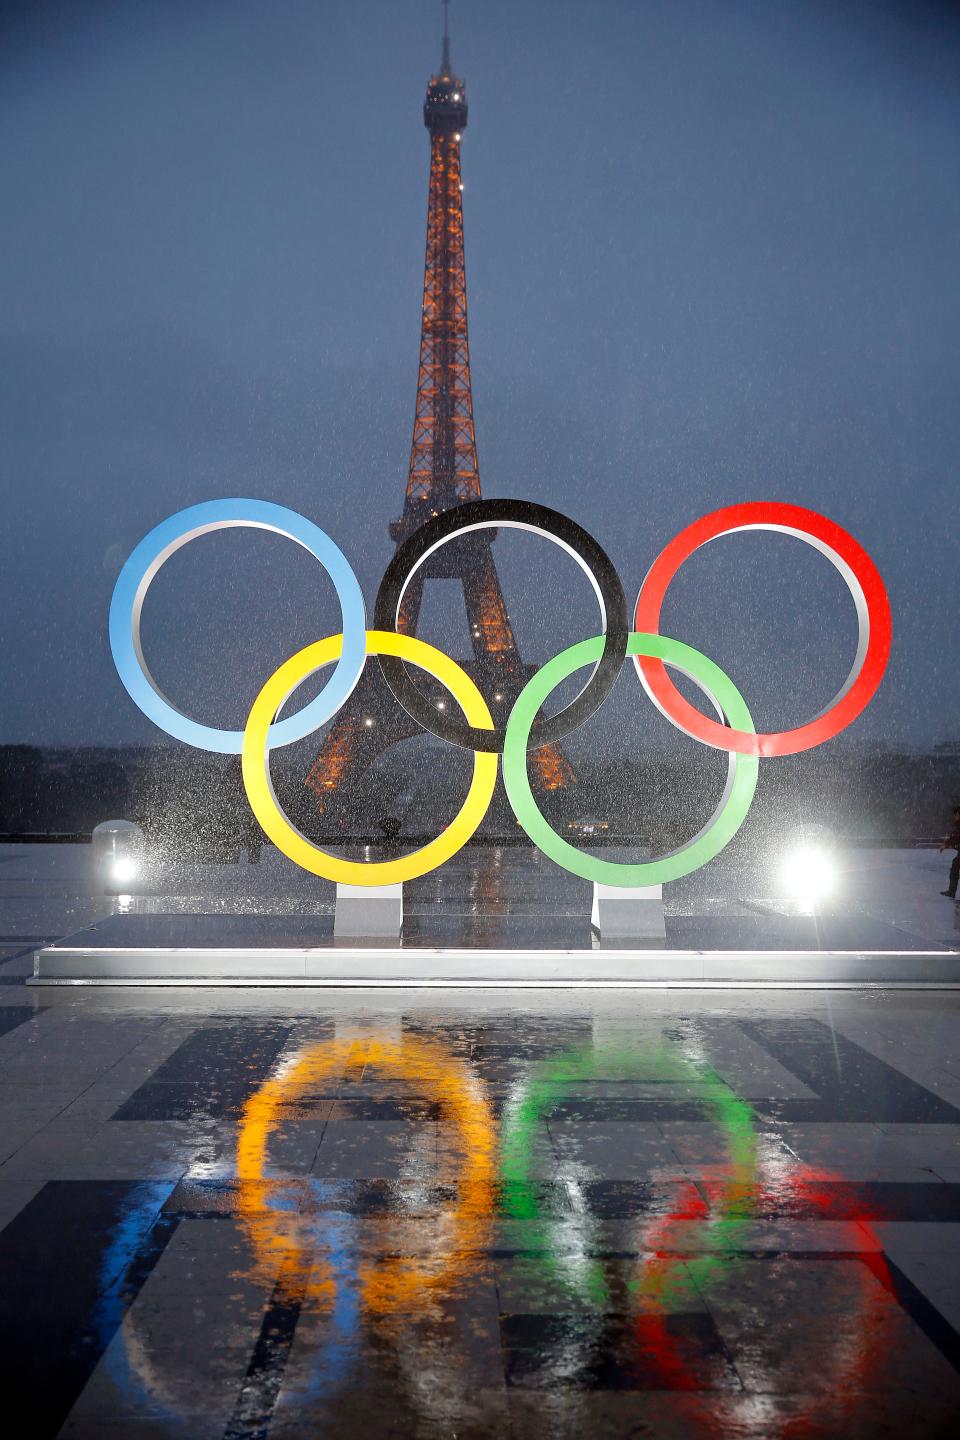 It’s been a century since France hosted the Summer Olympics, and Paris is planning many firsts to celebrate—including a flotilla of boats during an Opening Ceremony on the Seine River.